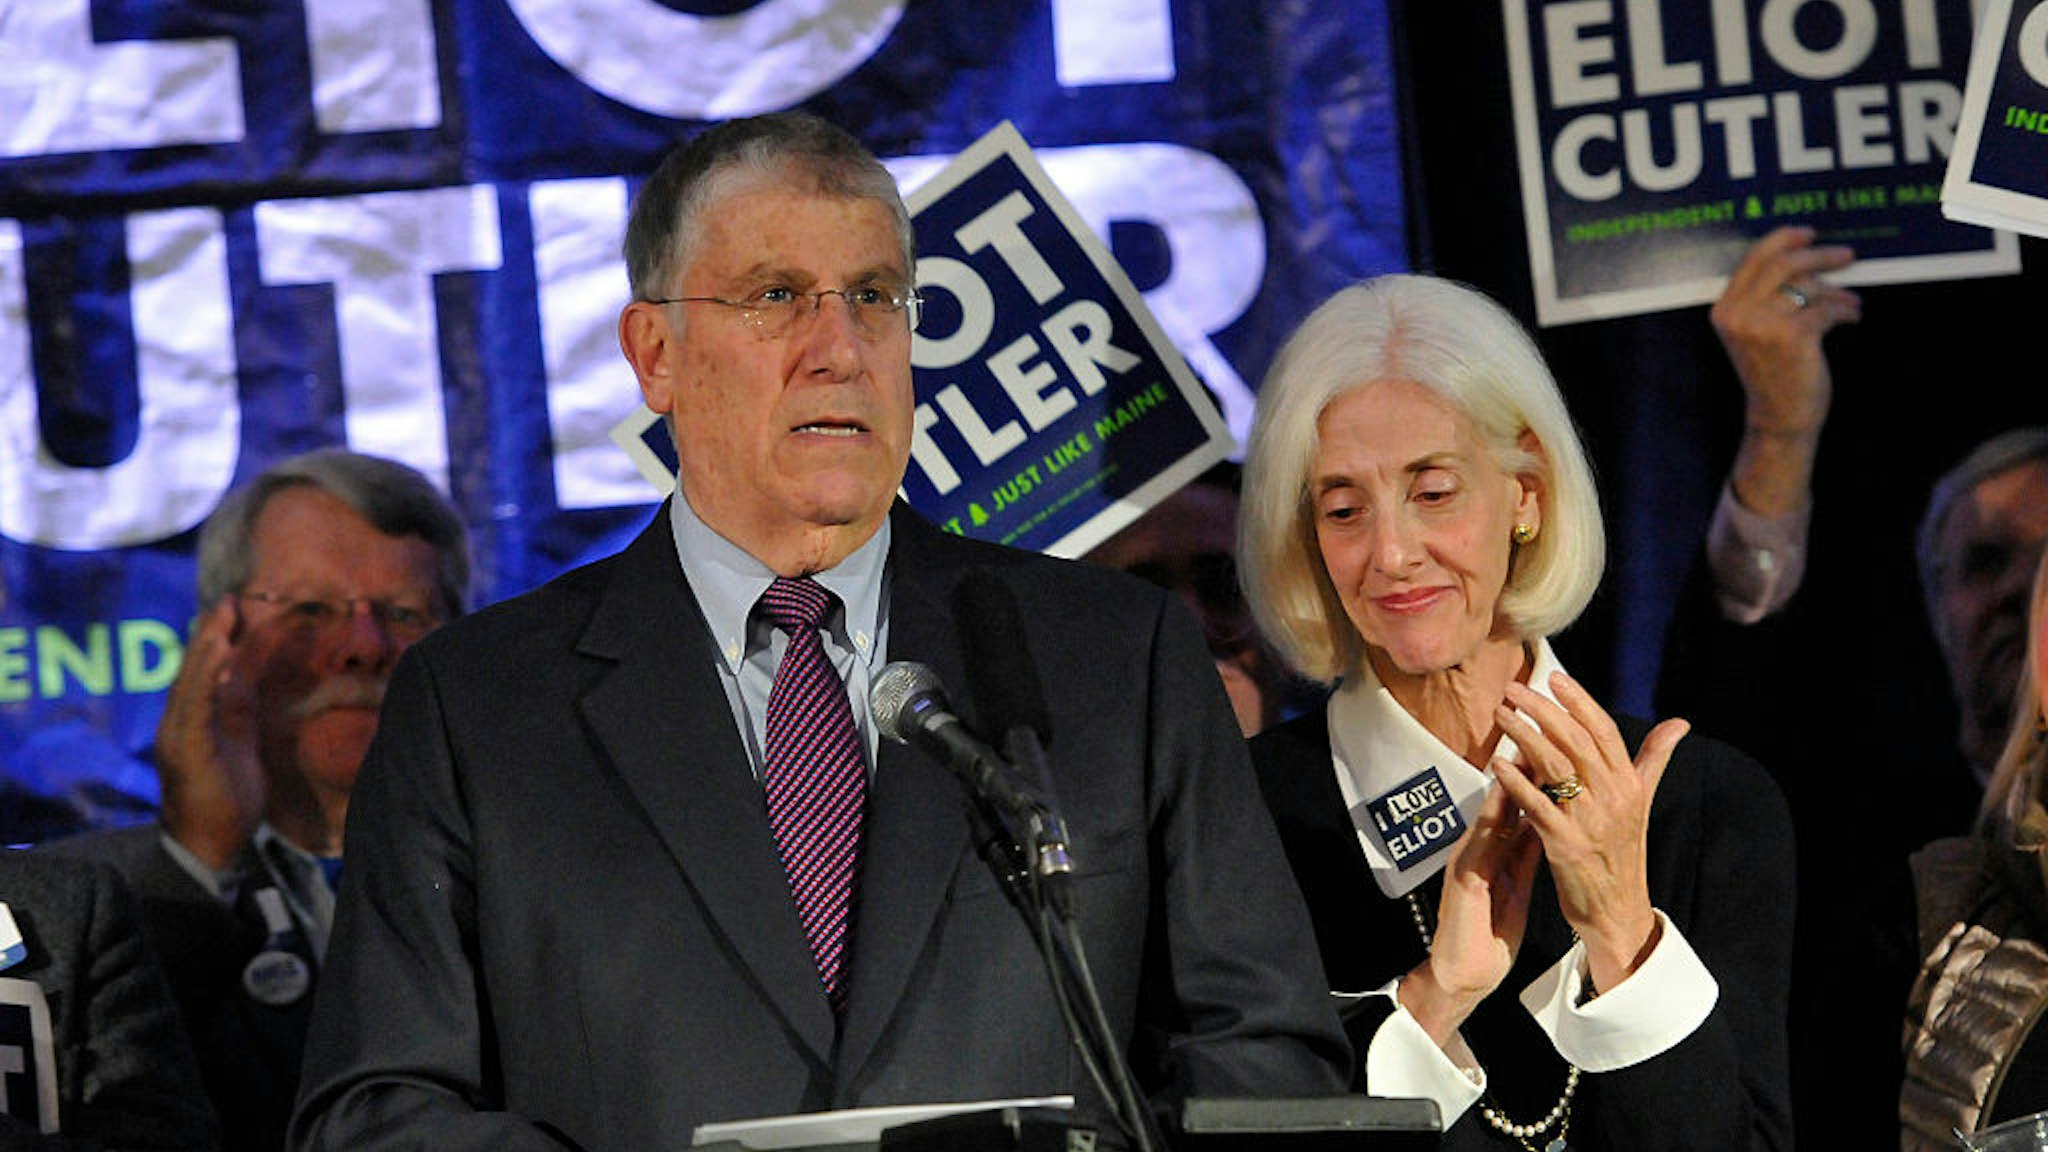 Independent Candidate for Governor Eliot Cutler's gives his concession speech with his wife Melanie Cutler at his side at the Ocean Gateway in Portland Tuesday, November 4, 2014.